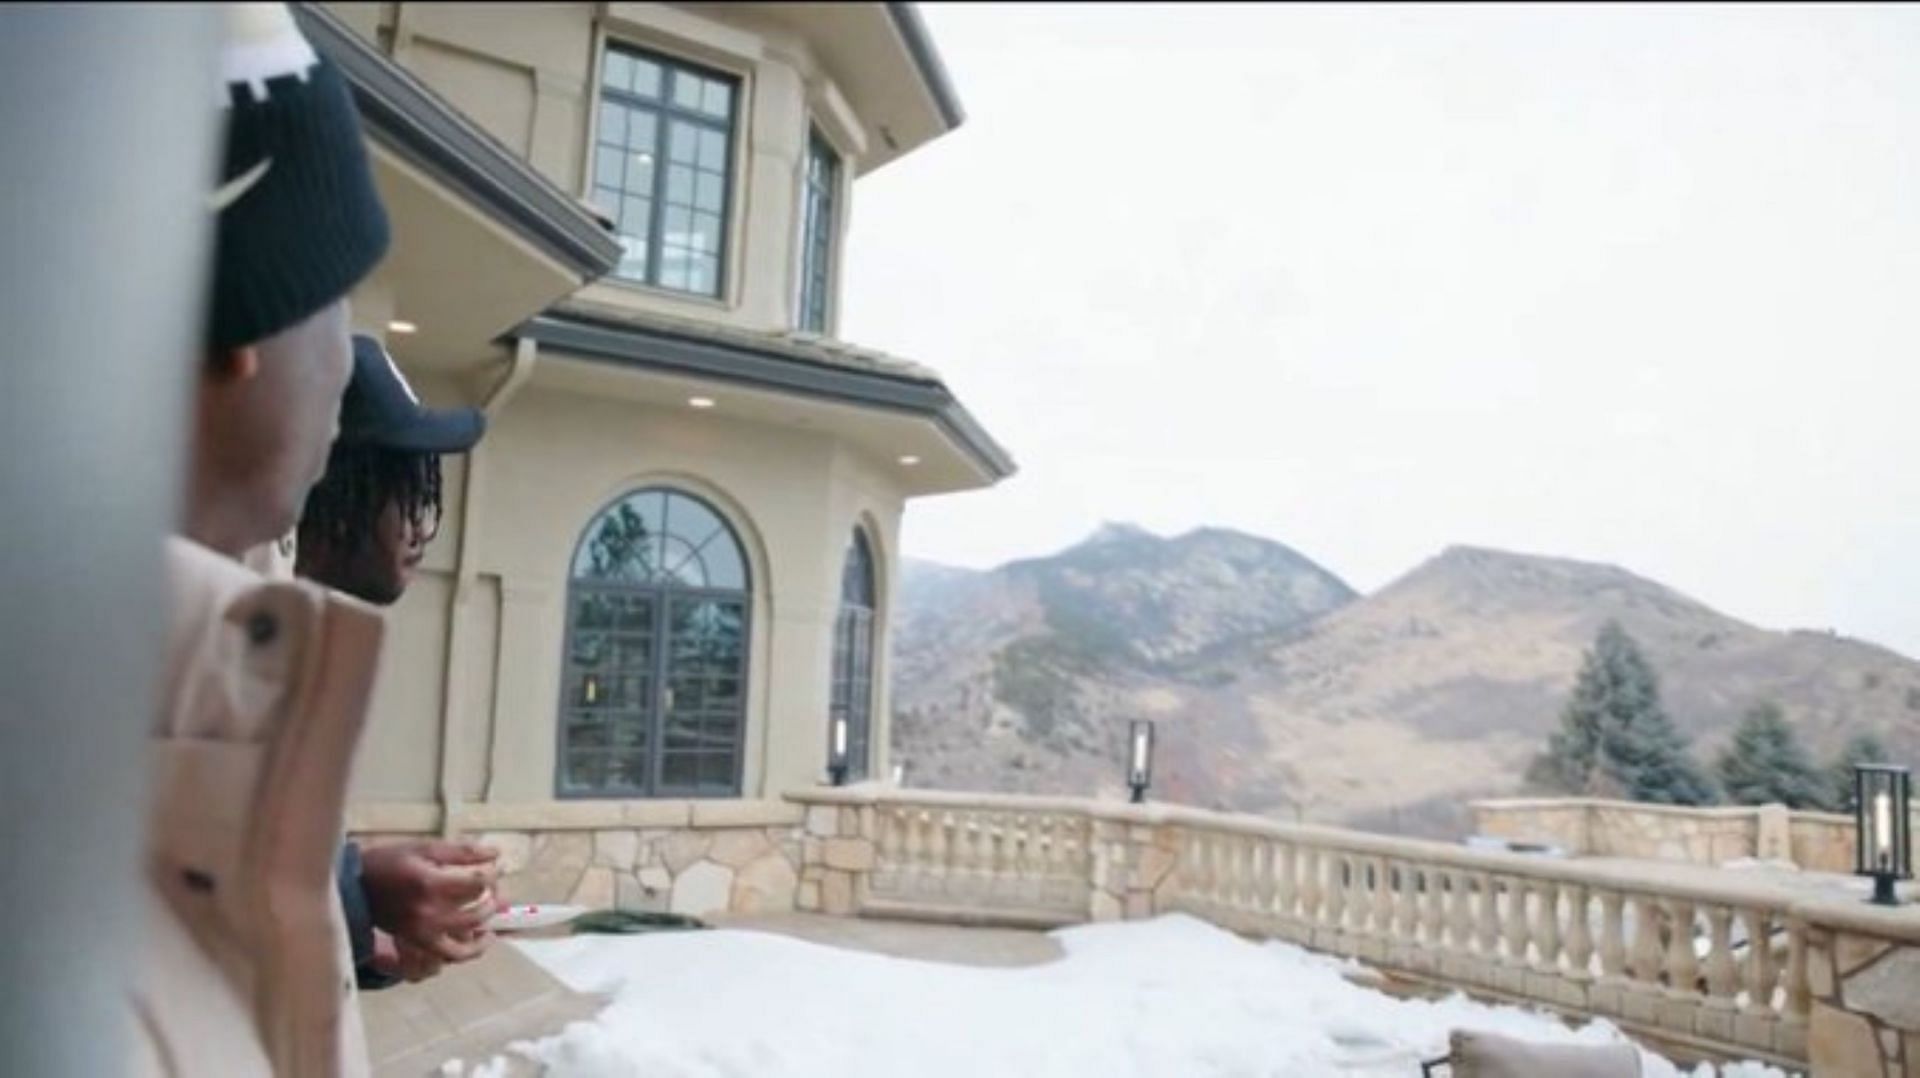 Deion Sanders has some beautiful views in his new Colorado mansion 